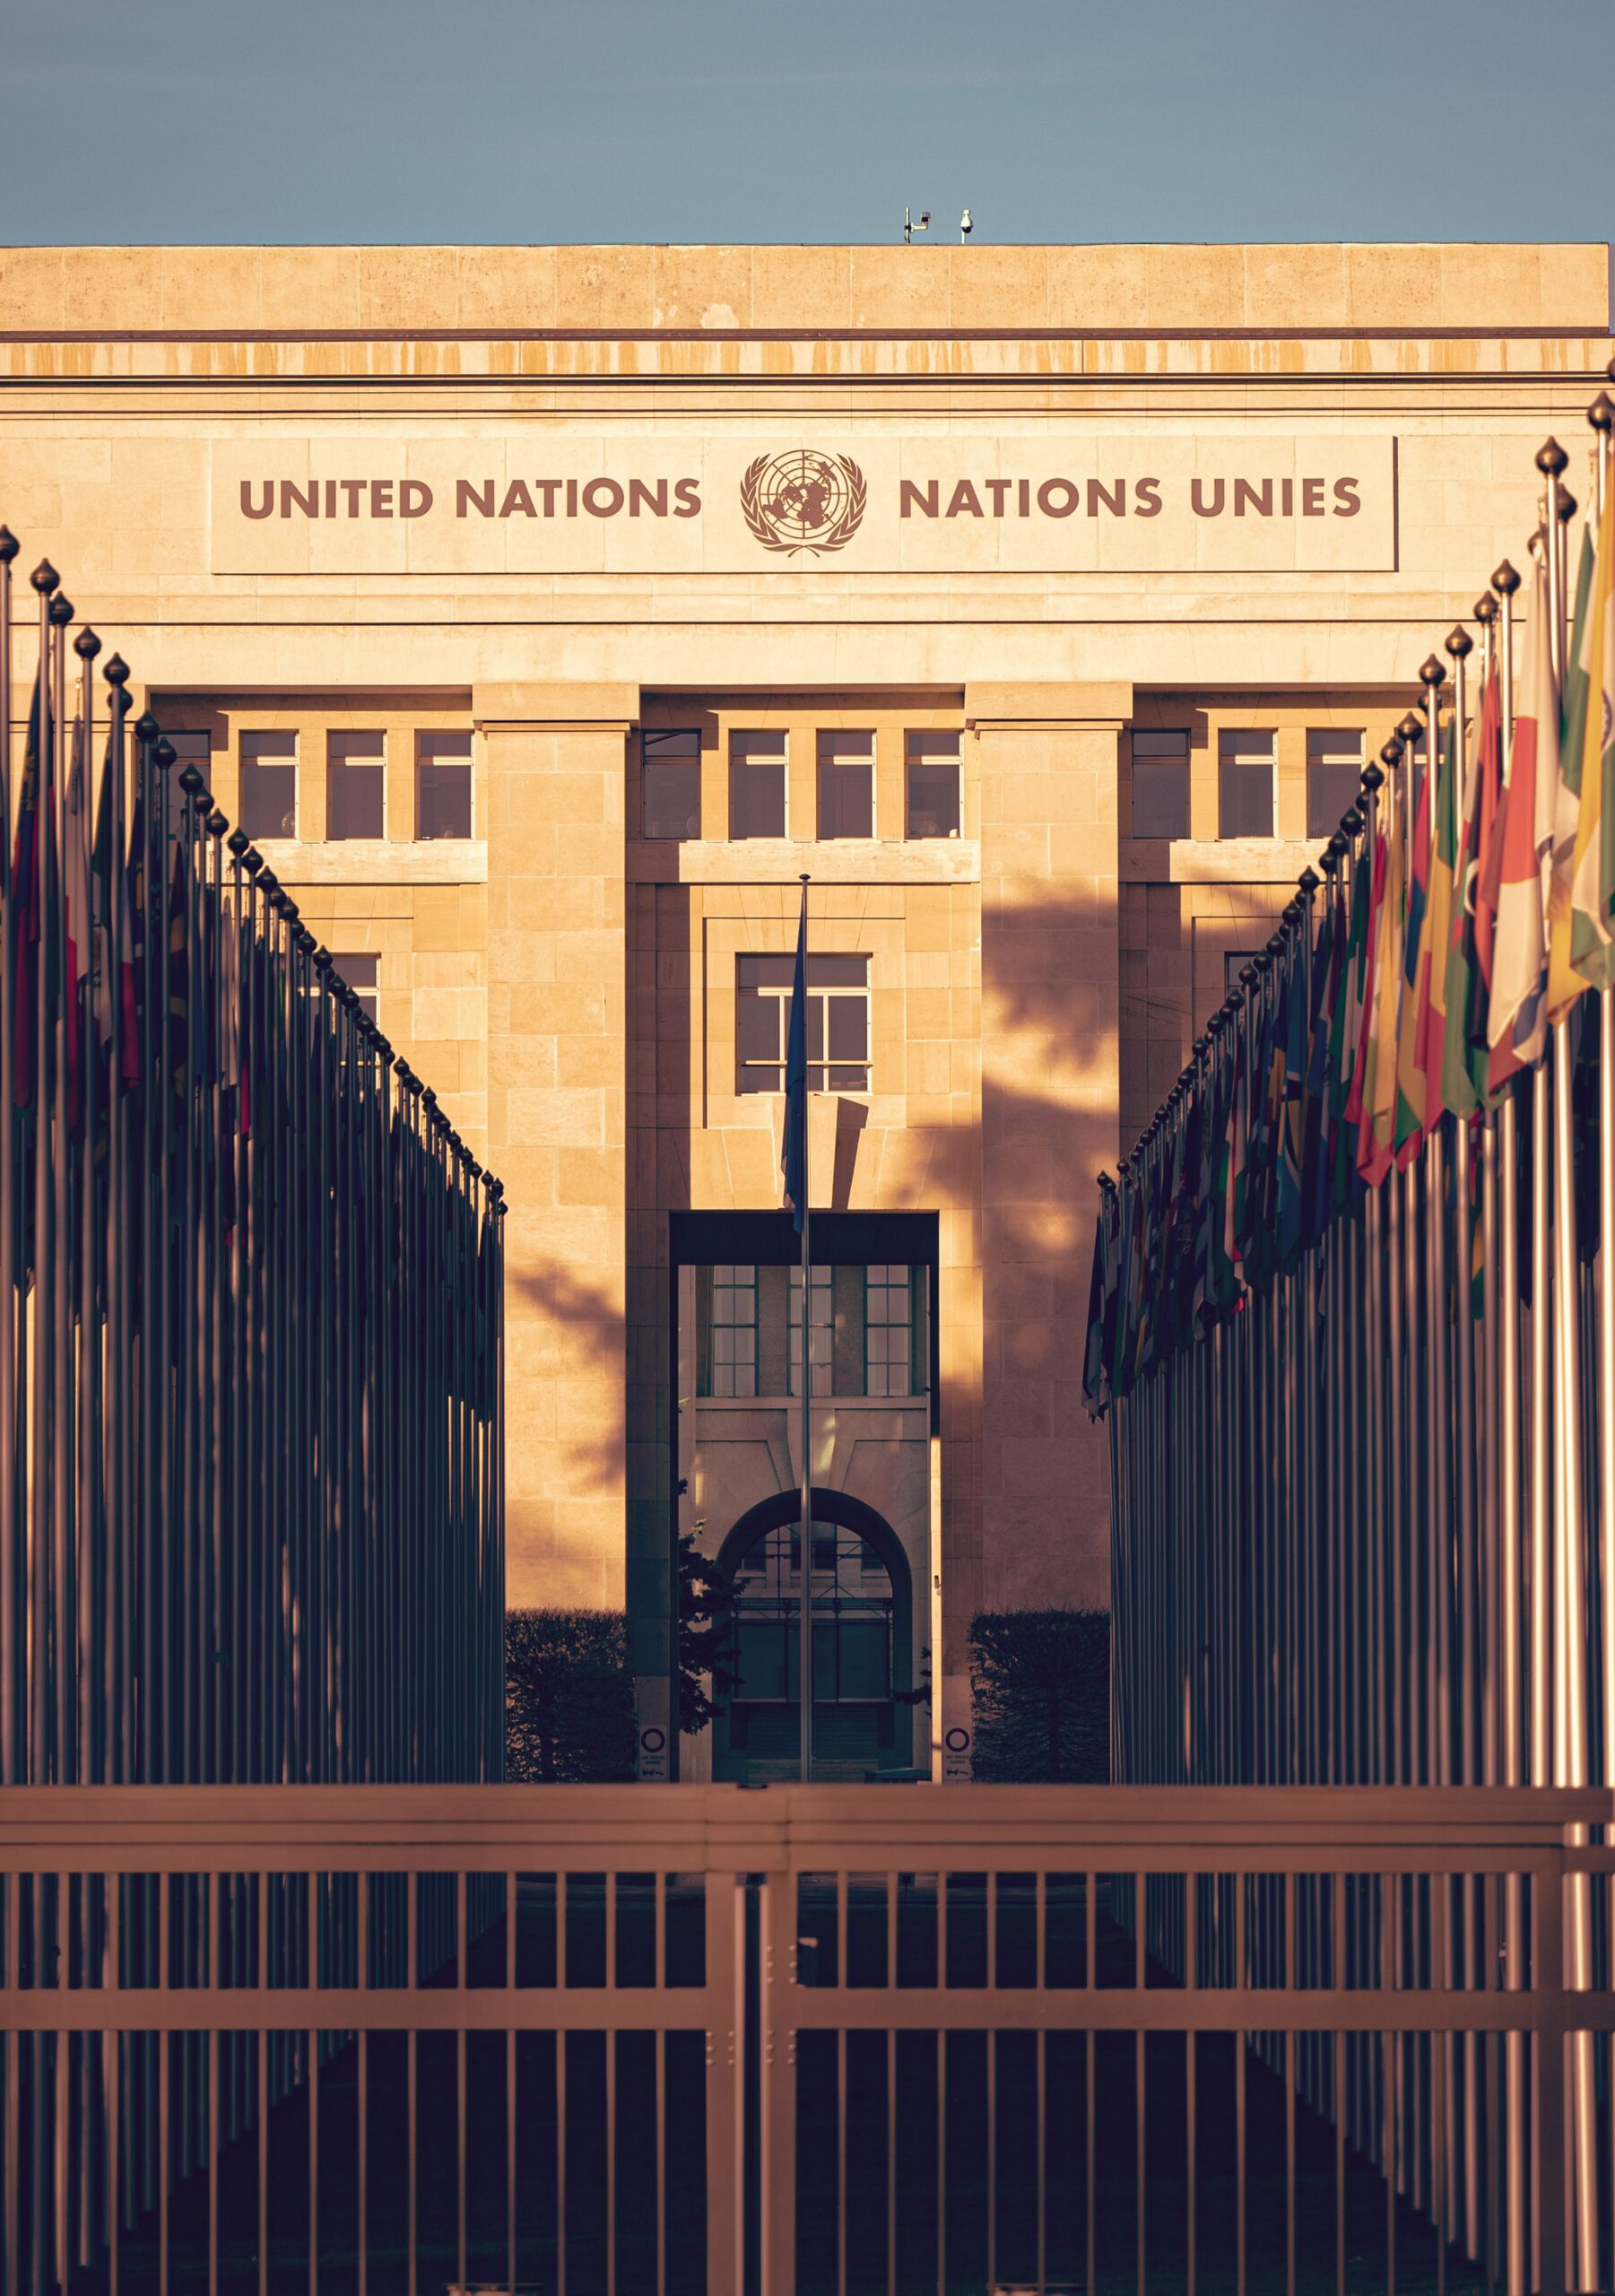 A picture of the United Nations building, with "United Nations" written on the facade